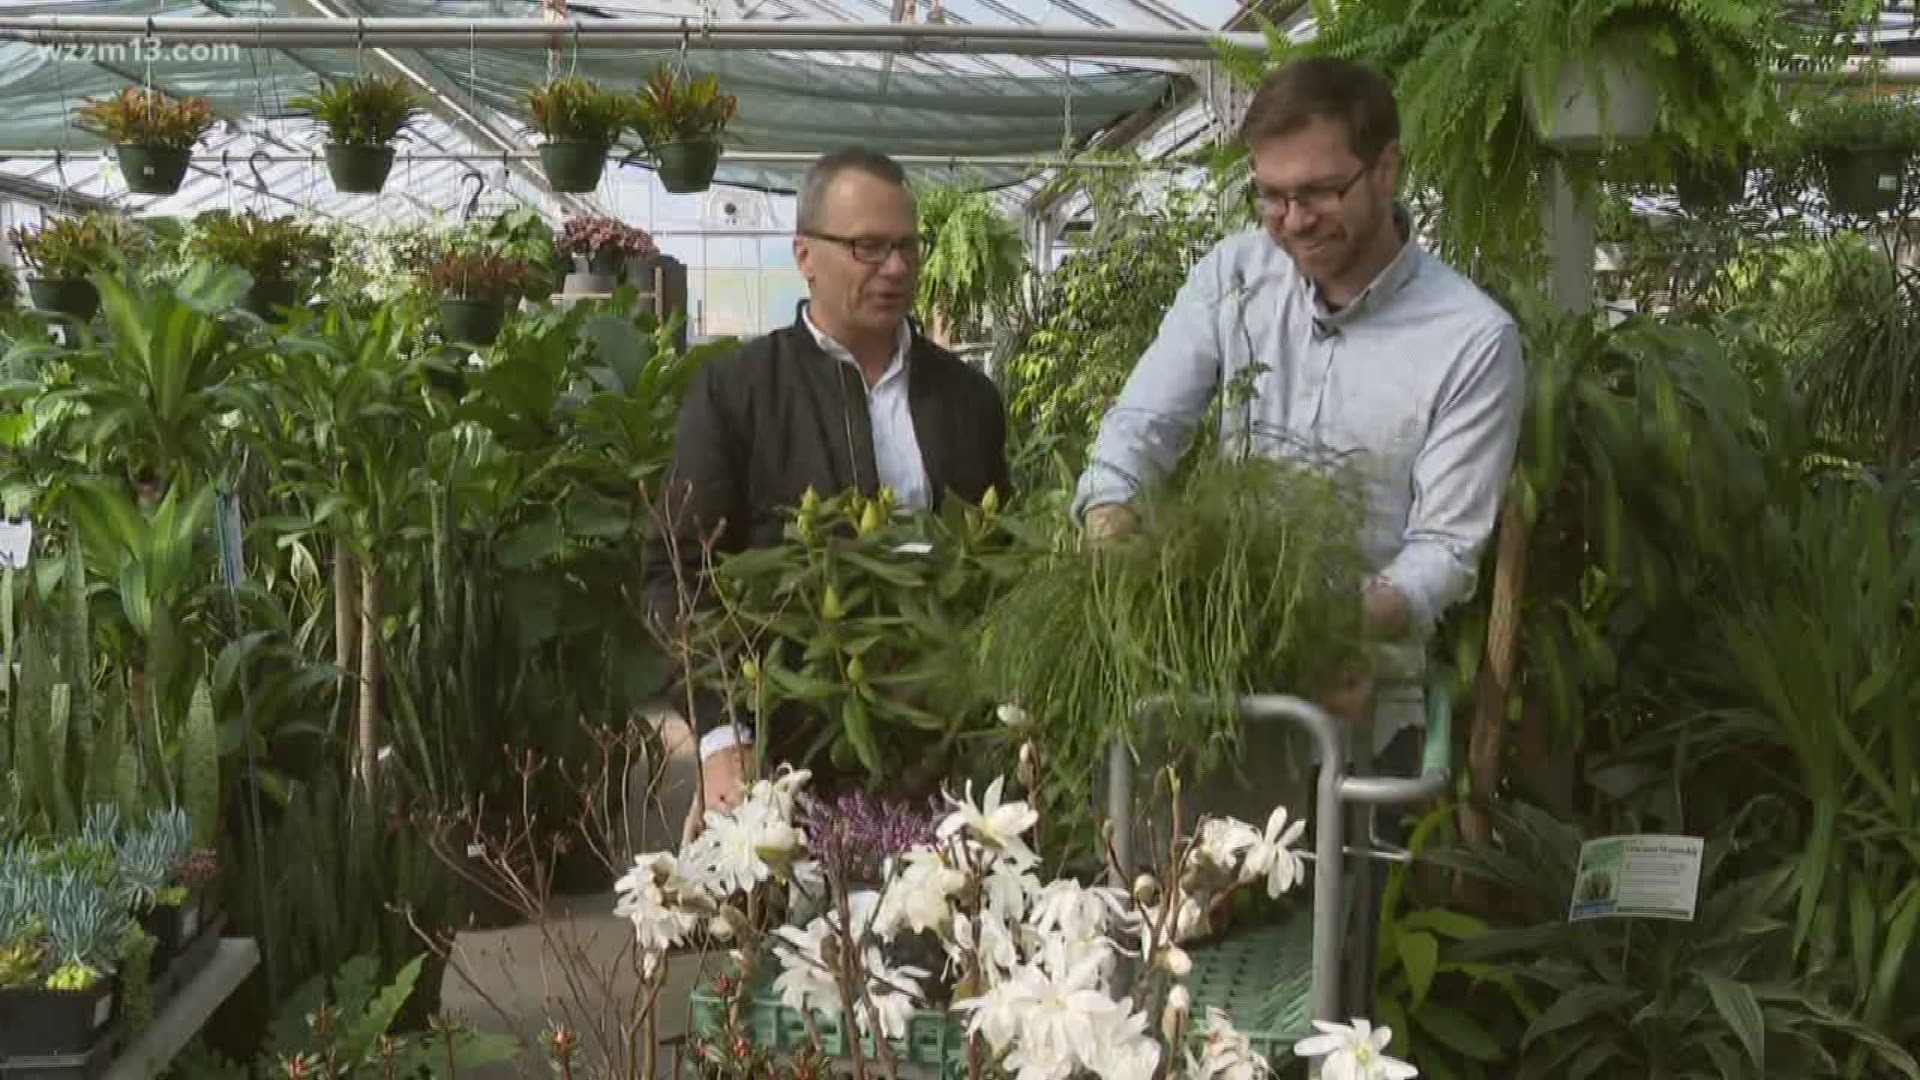 Greenthumb expert Rick Vuyst shows us some unique and beautiful plants that will help keep your garden diverse.